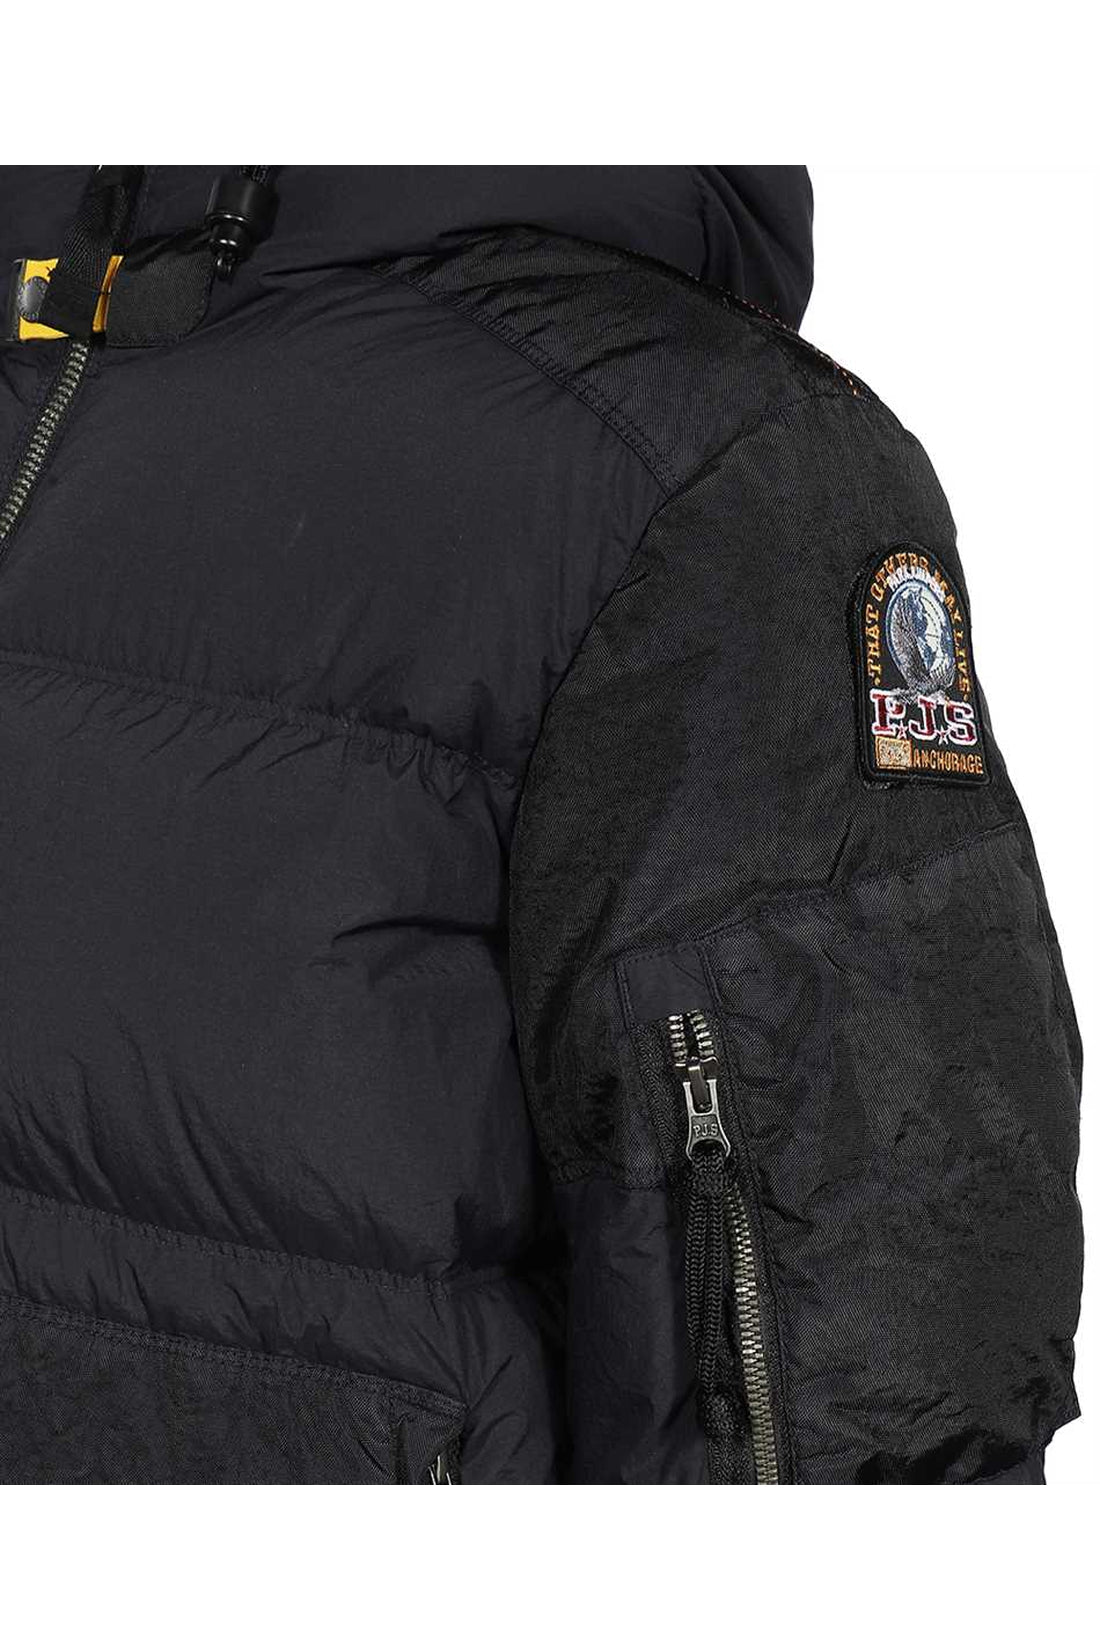 Parajumpers-OUTLET-SALE-Tomcat hooded down jacket-ARCHIVIST